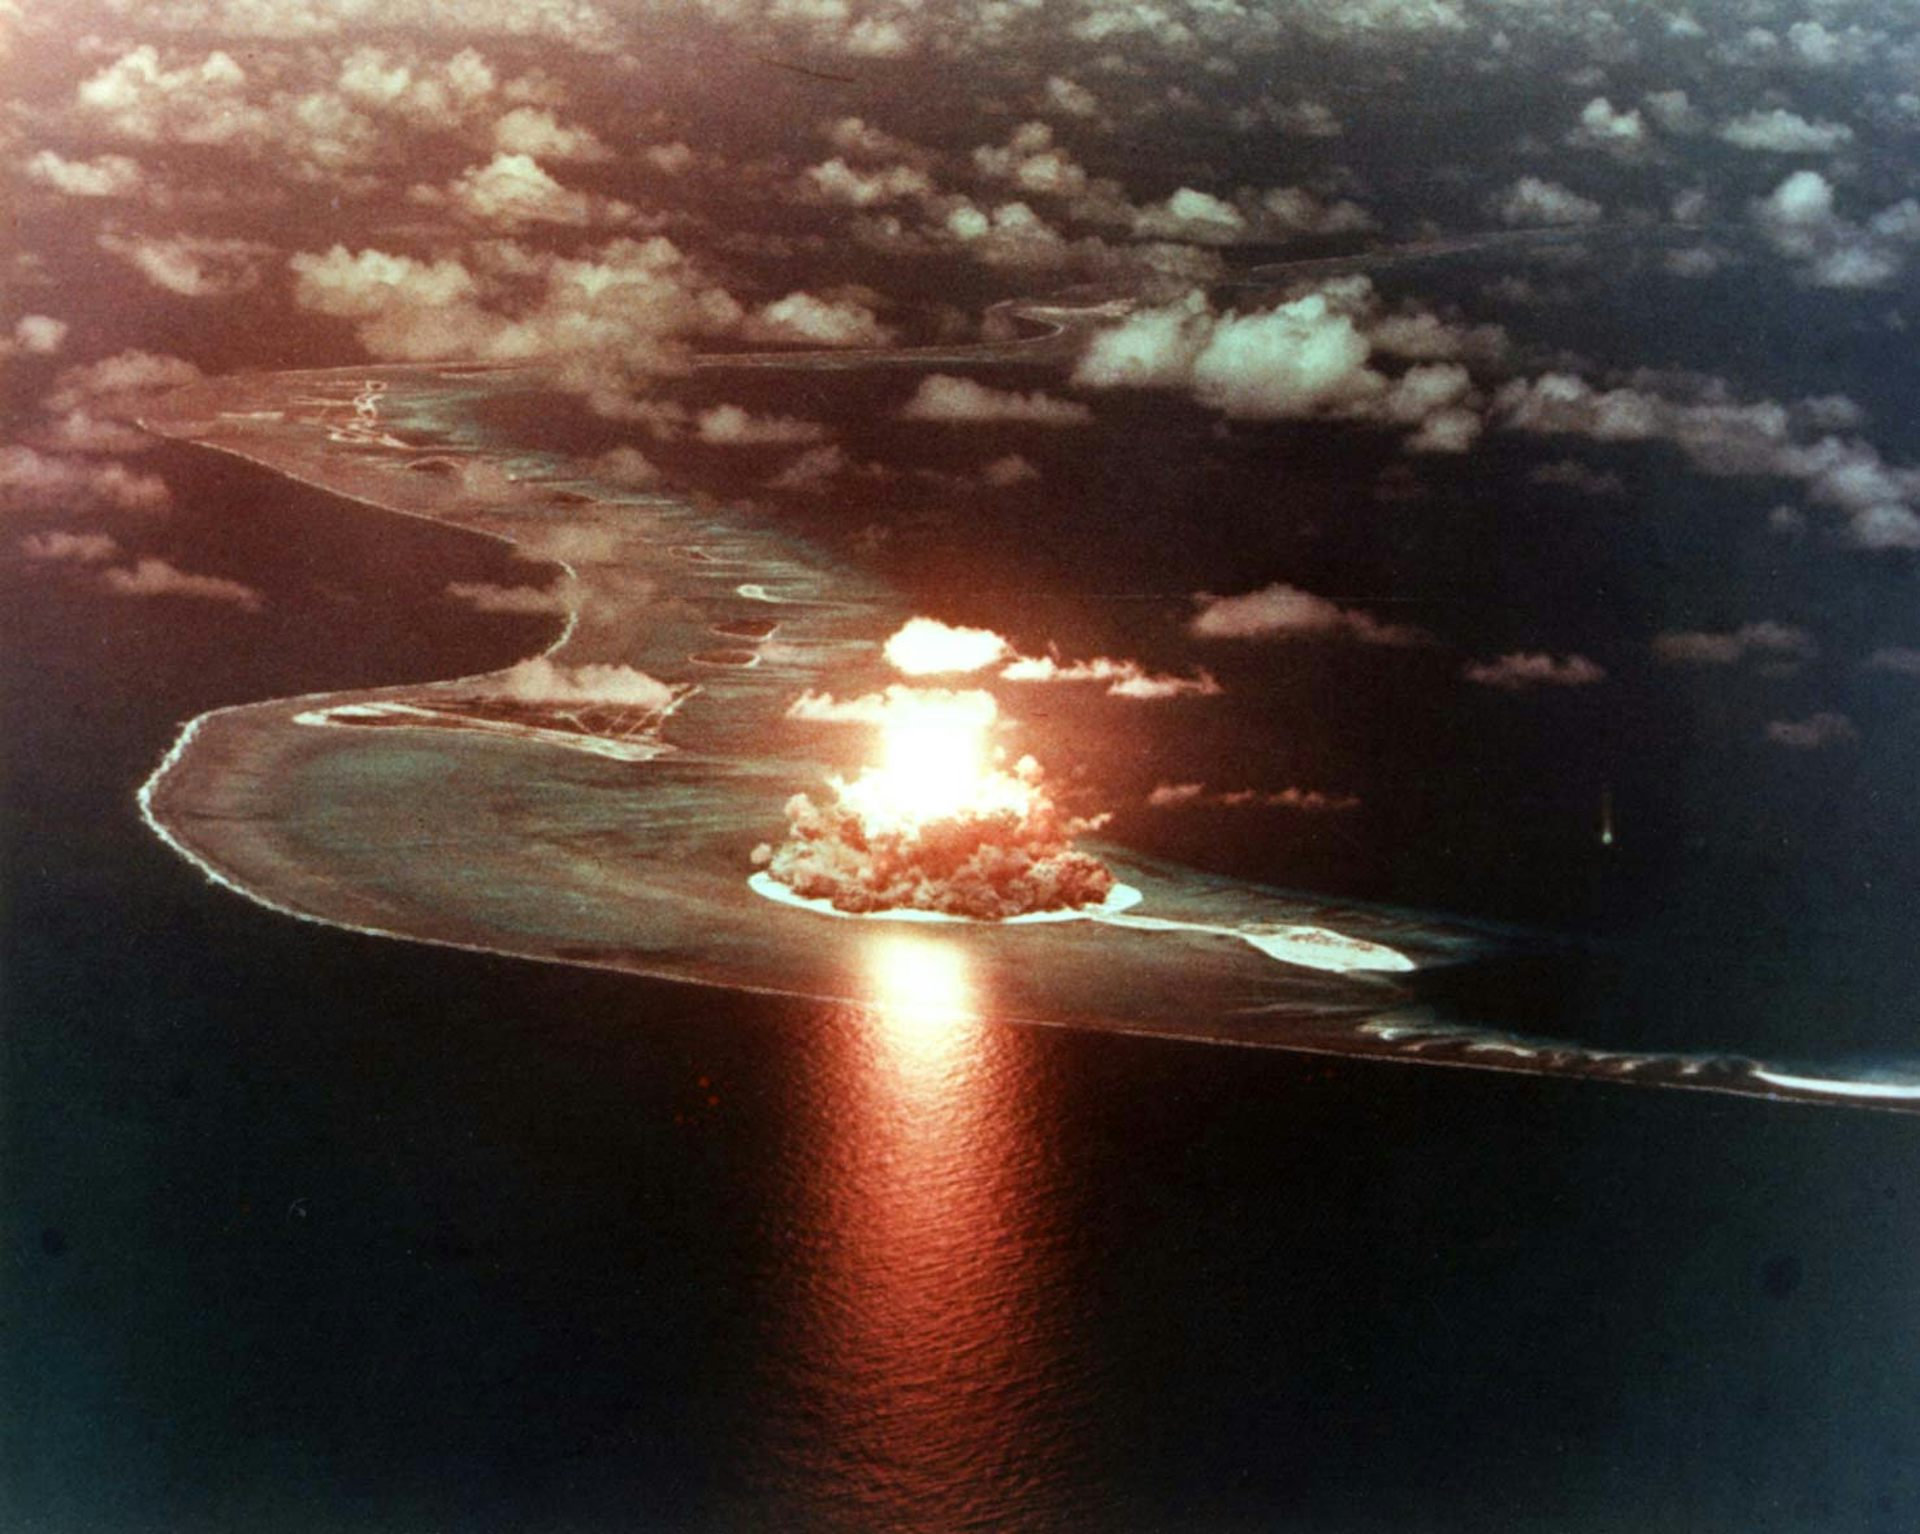 Bikini Islanders Still Deal with Fallout of US Nuclear Tests